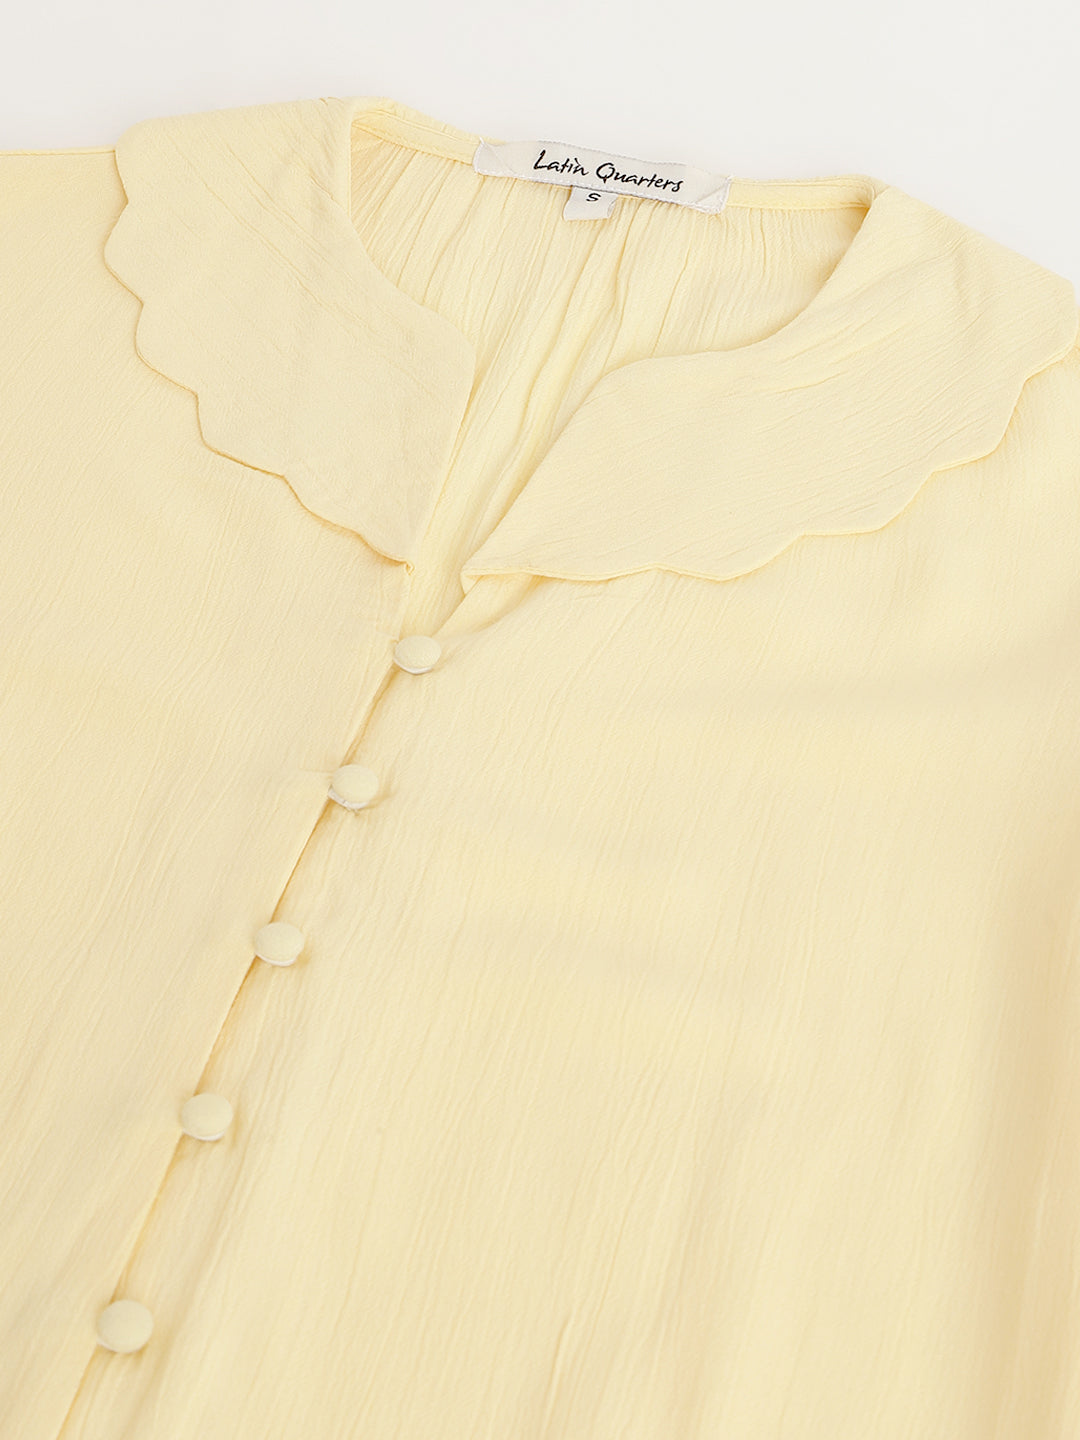 Yellow Solid 3/4 Sleeve Casual Shirt